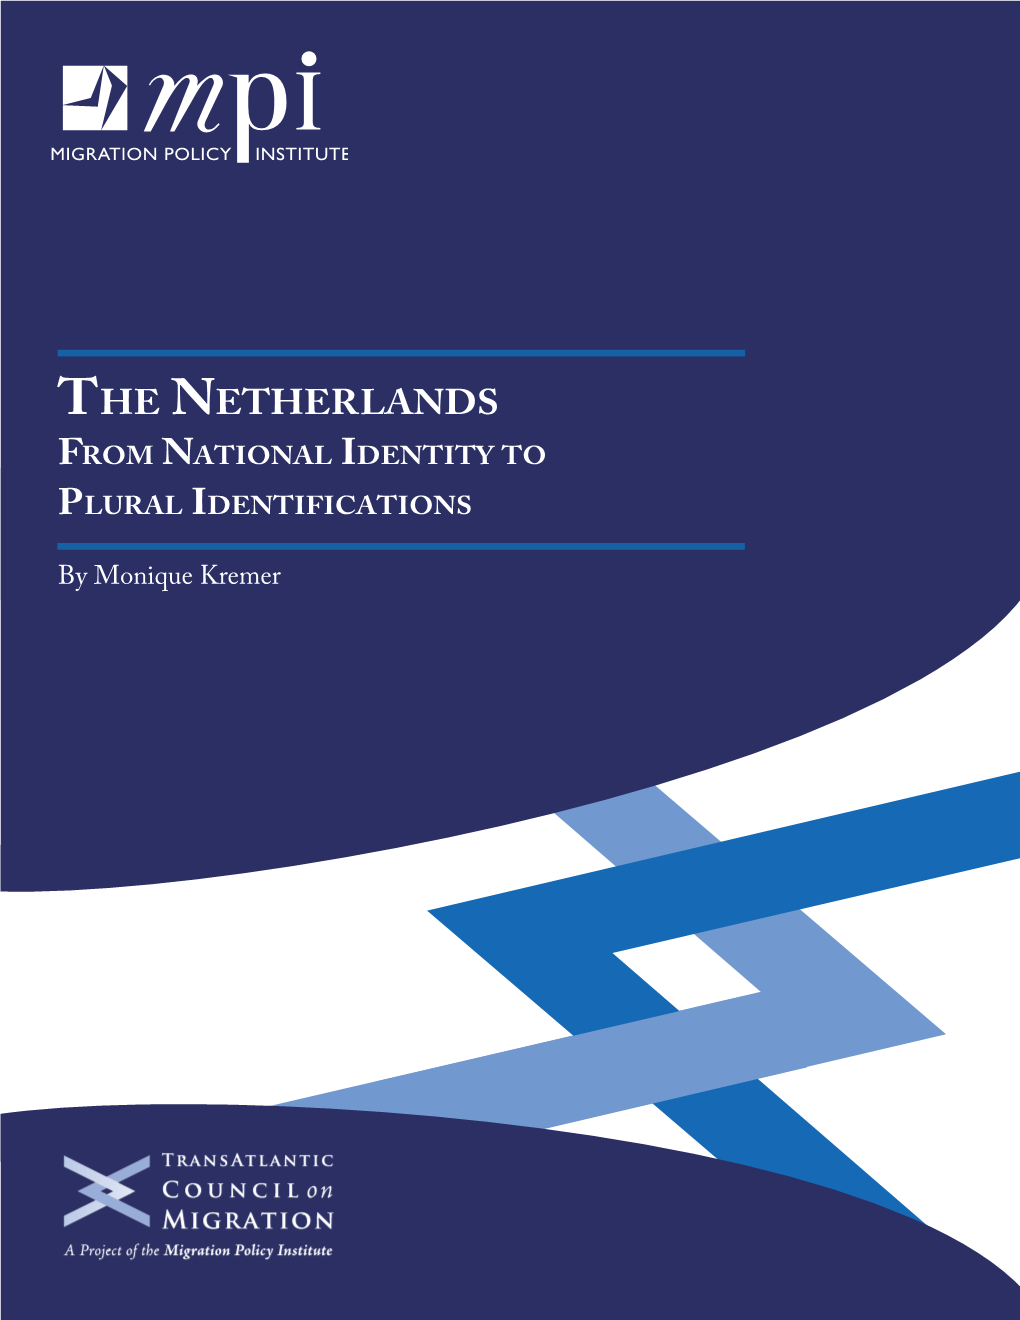 The Netherlands from National Identity to Plural Identifications